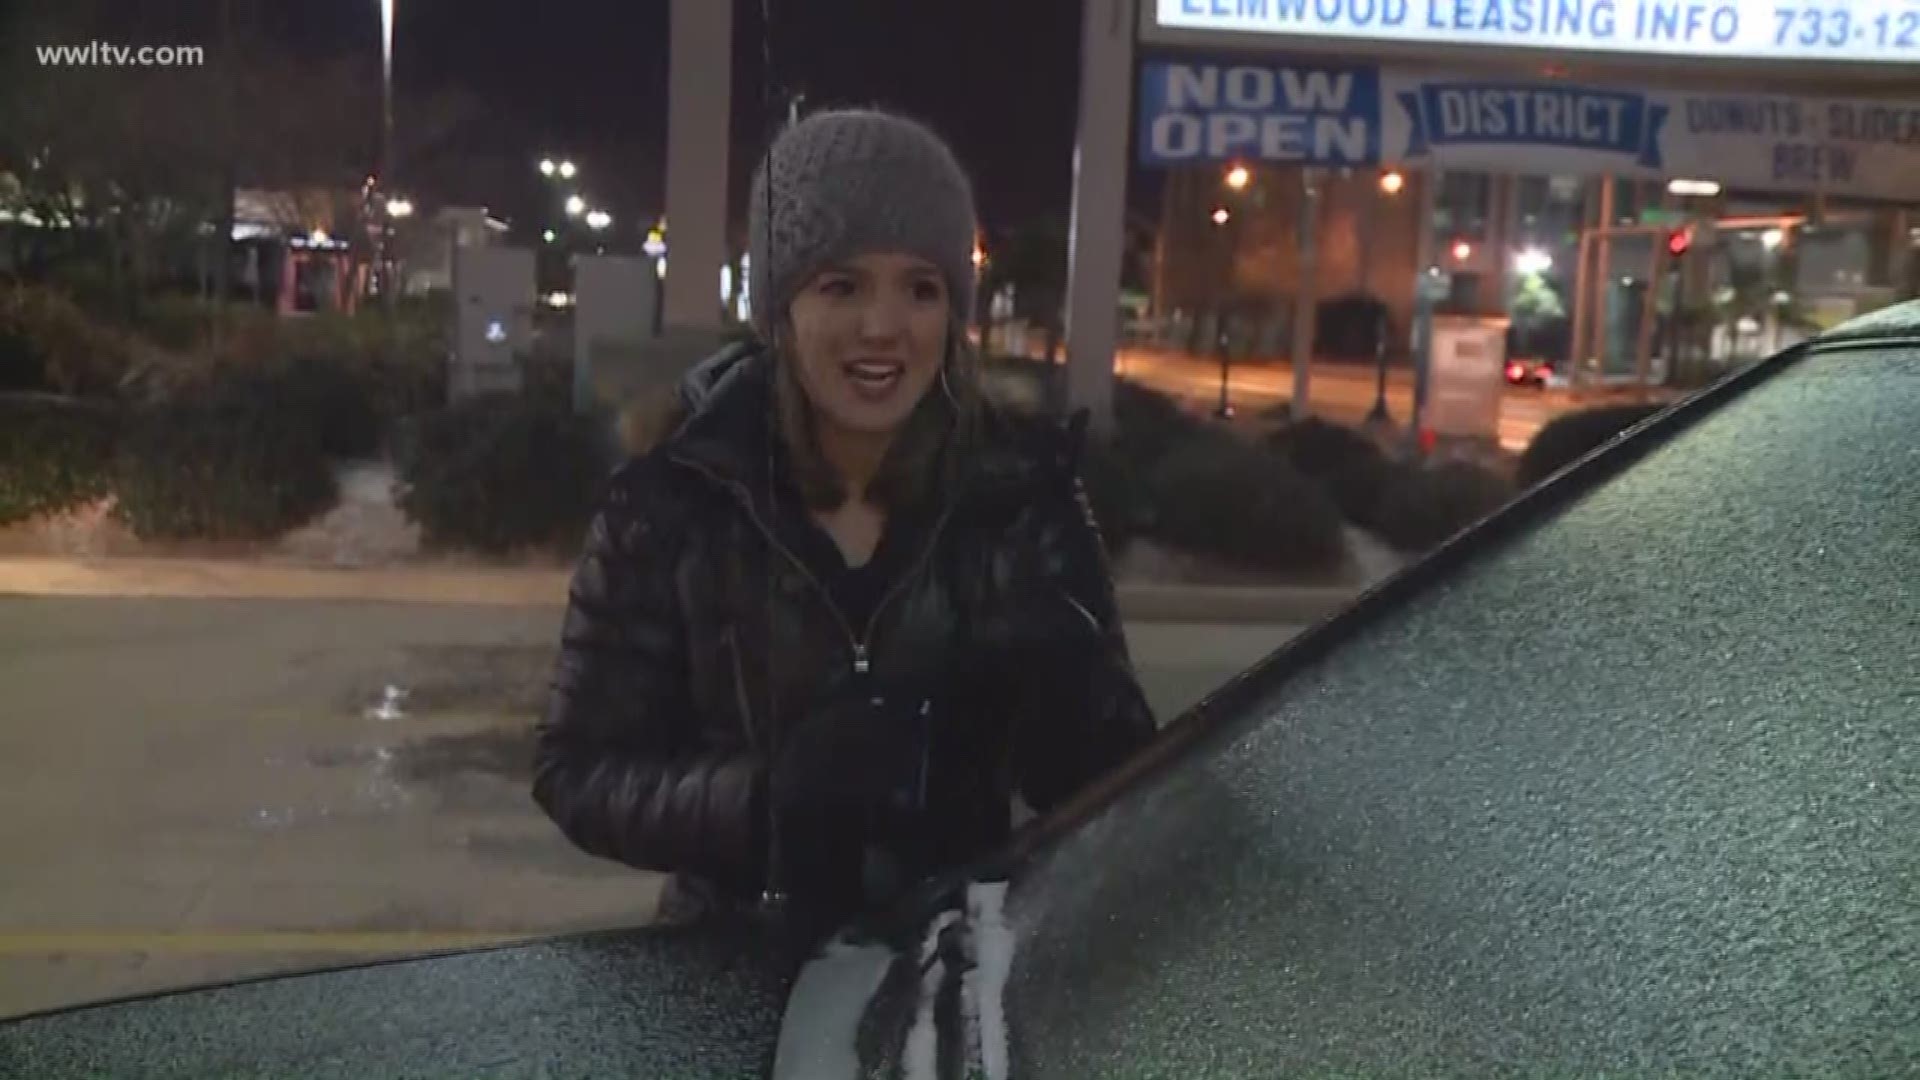 Katie Steiner shows you how to get the ice off of your windshield.